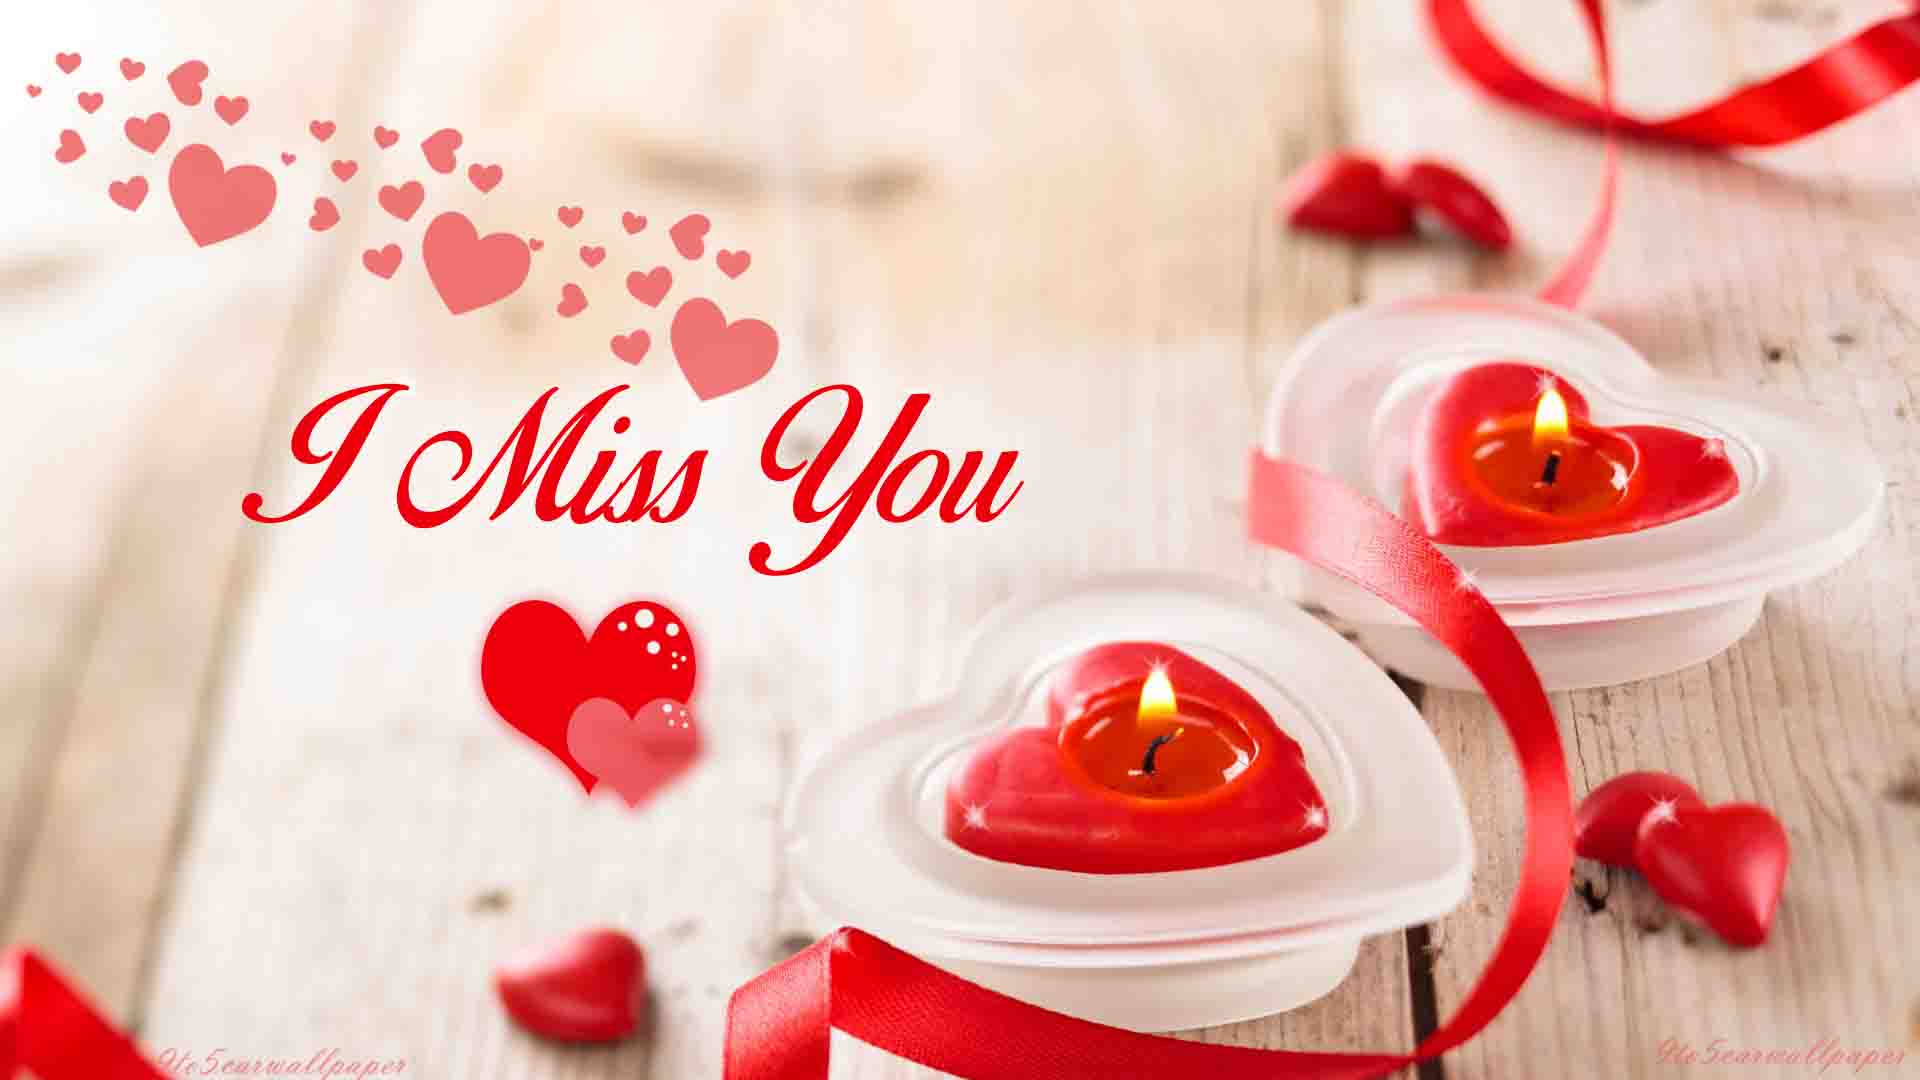 Beautiful I Miss You Pictures & Images - Beautiful Images Of I Miss You , HD Wallpaper & Backgrounds